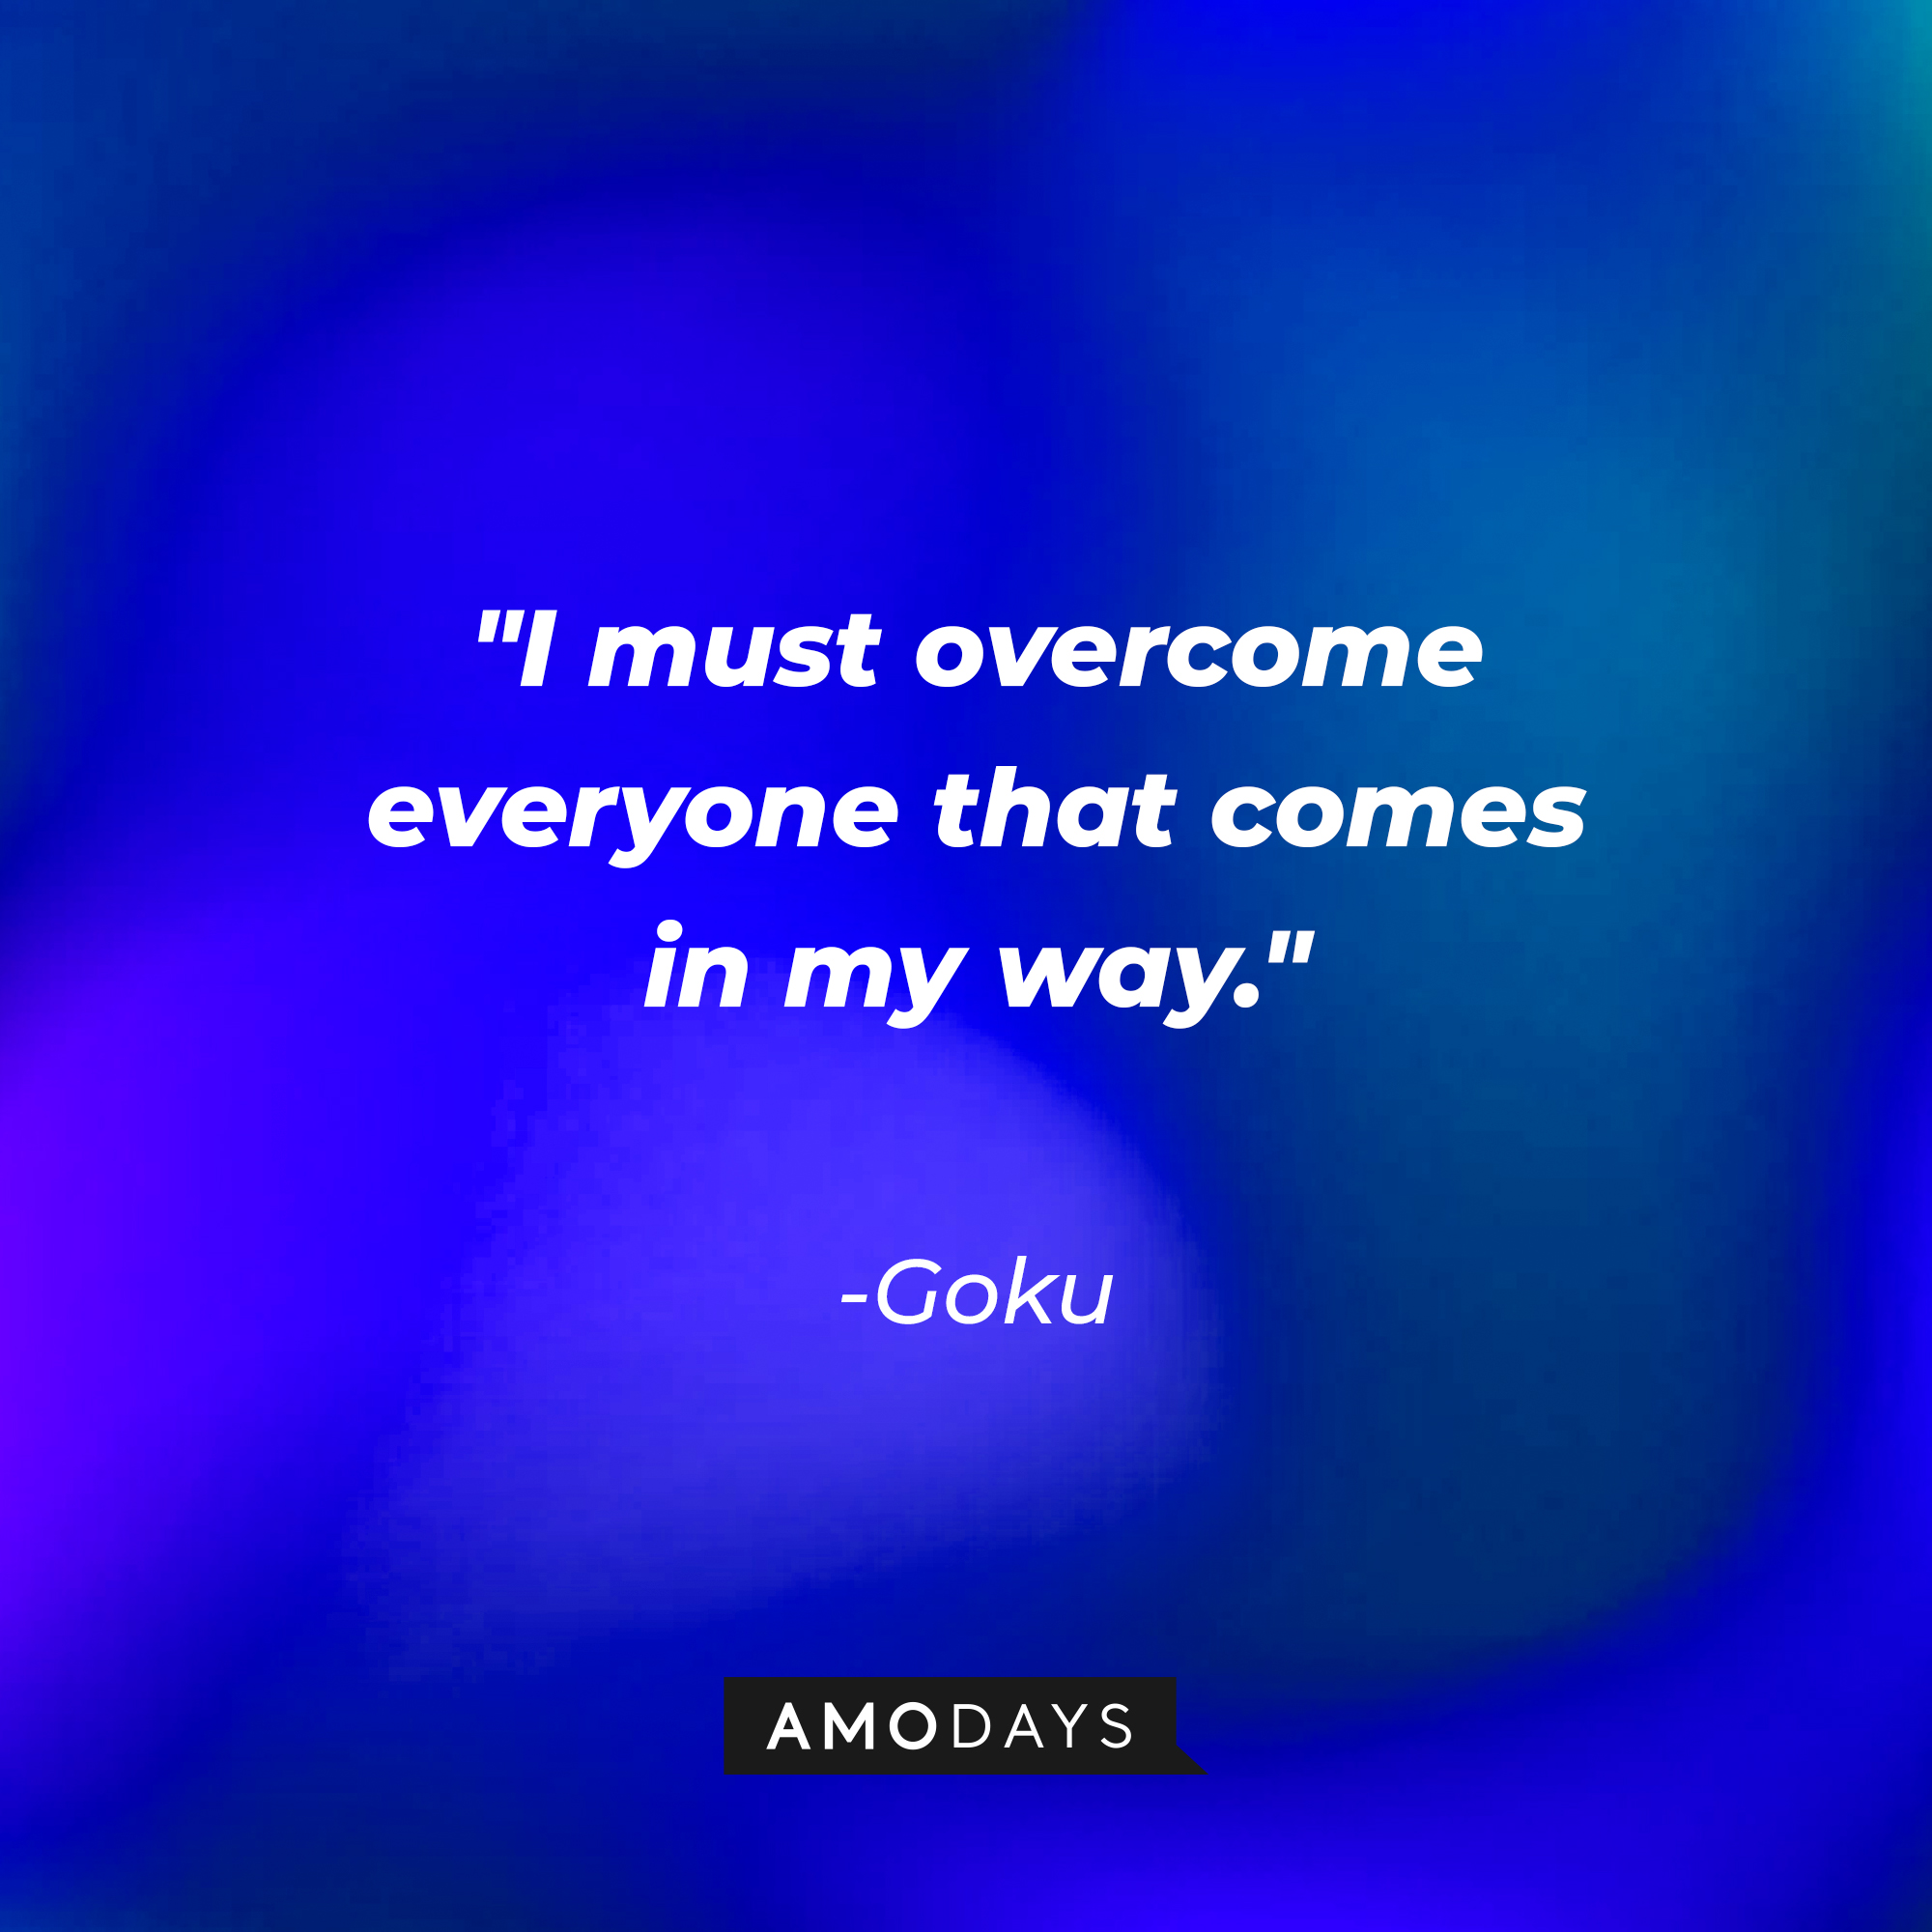 Goku's quote: "I must overcome everyone that comes in my way." | Source: youtube.com/DragonballBlack